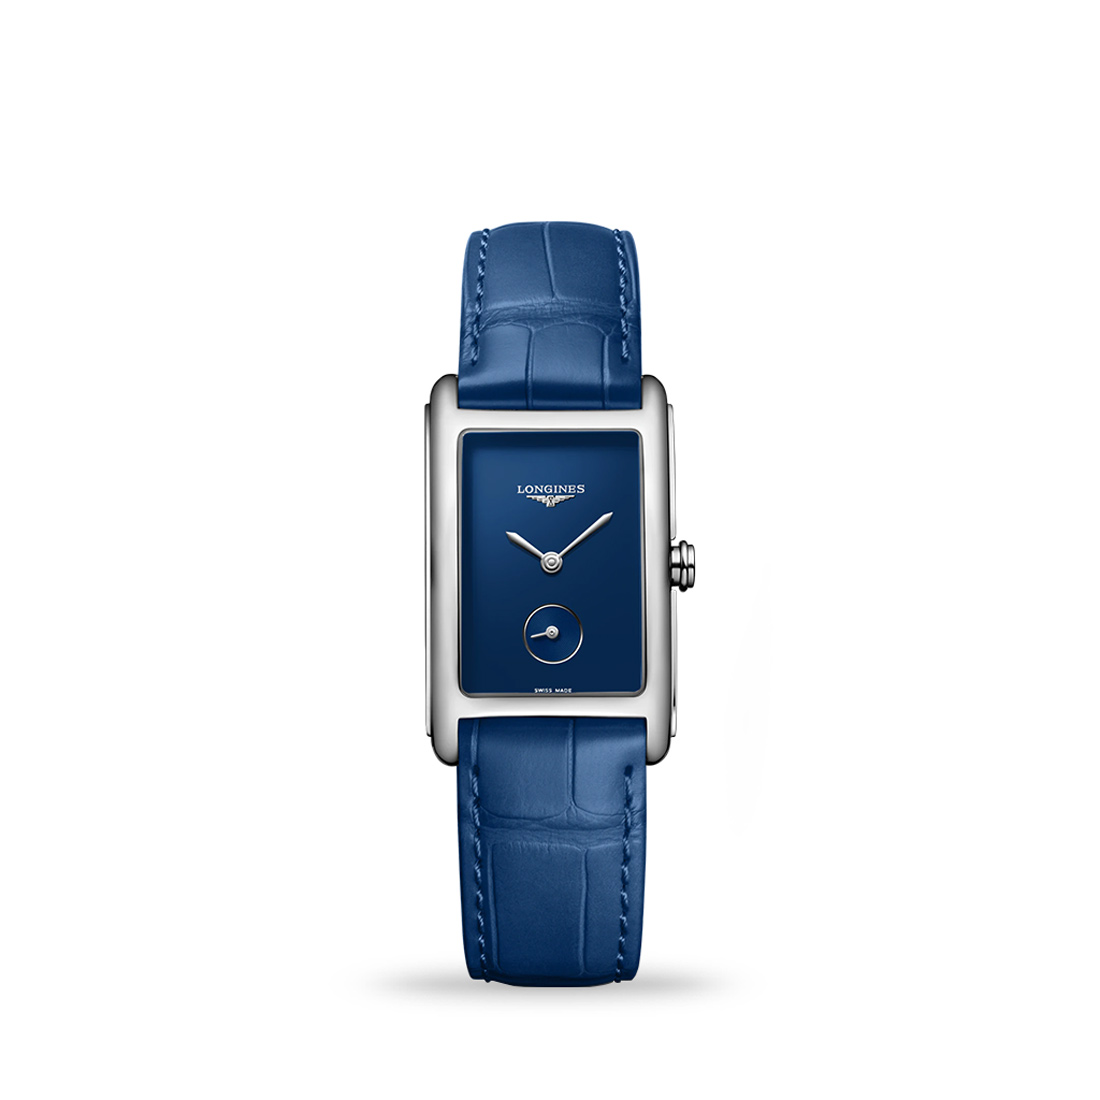 Longines DolceVita 23mm Blue Dial Leather Strap